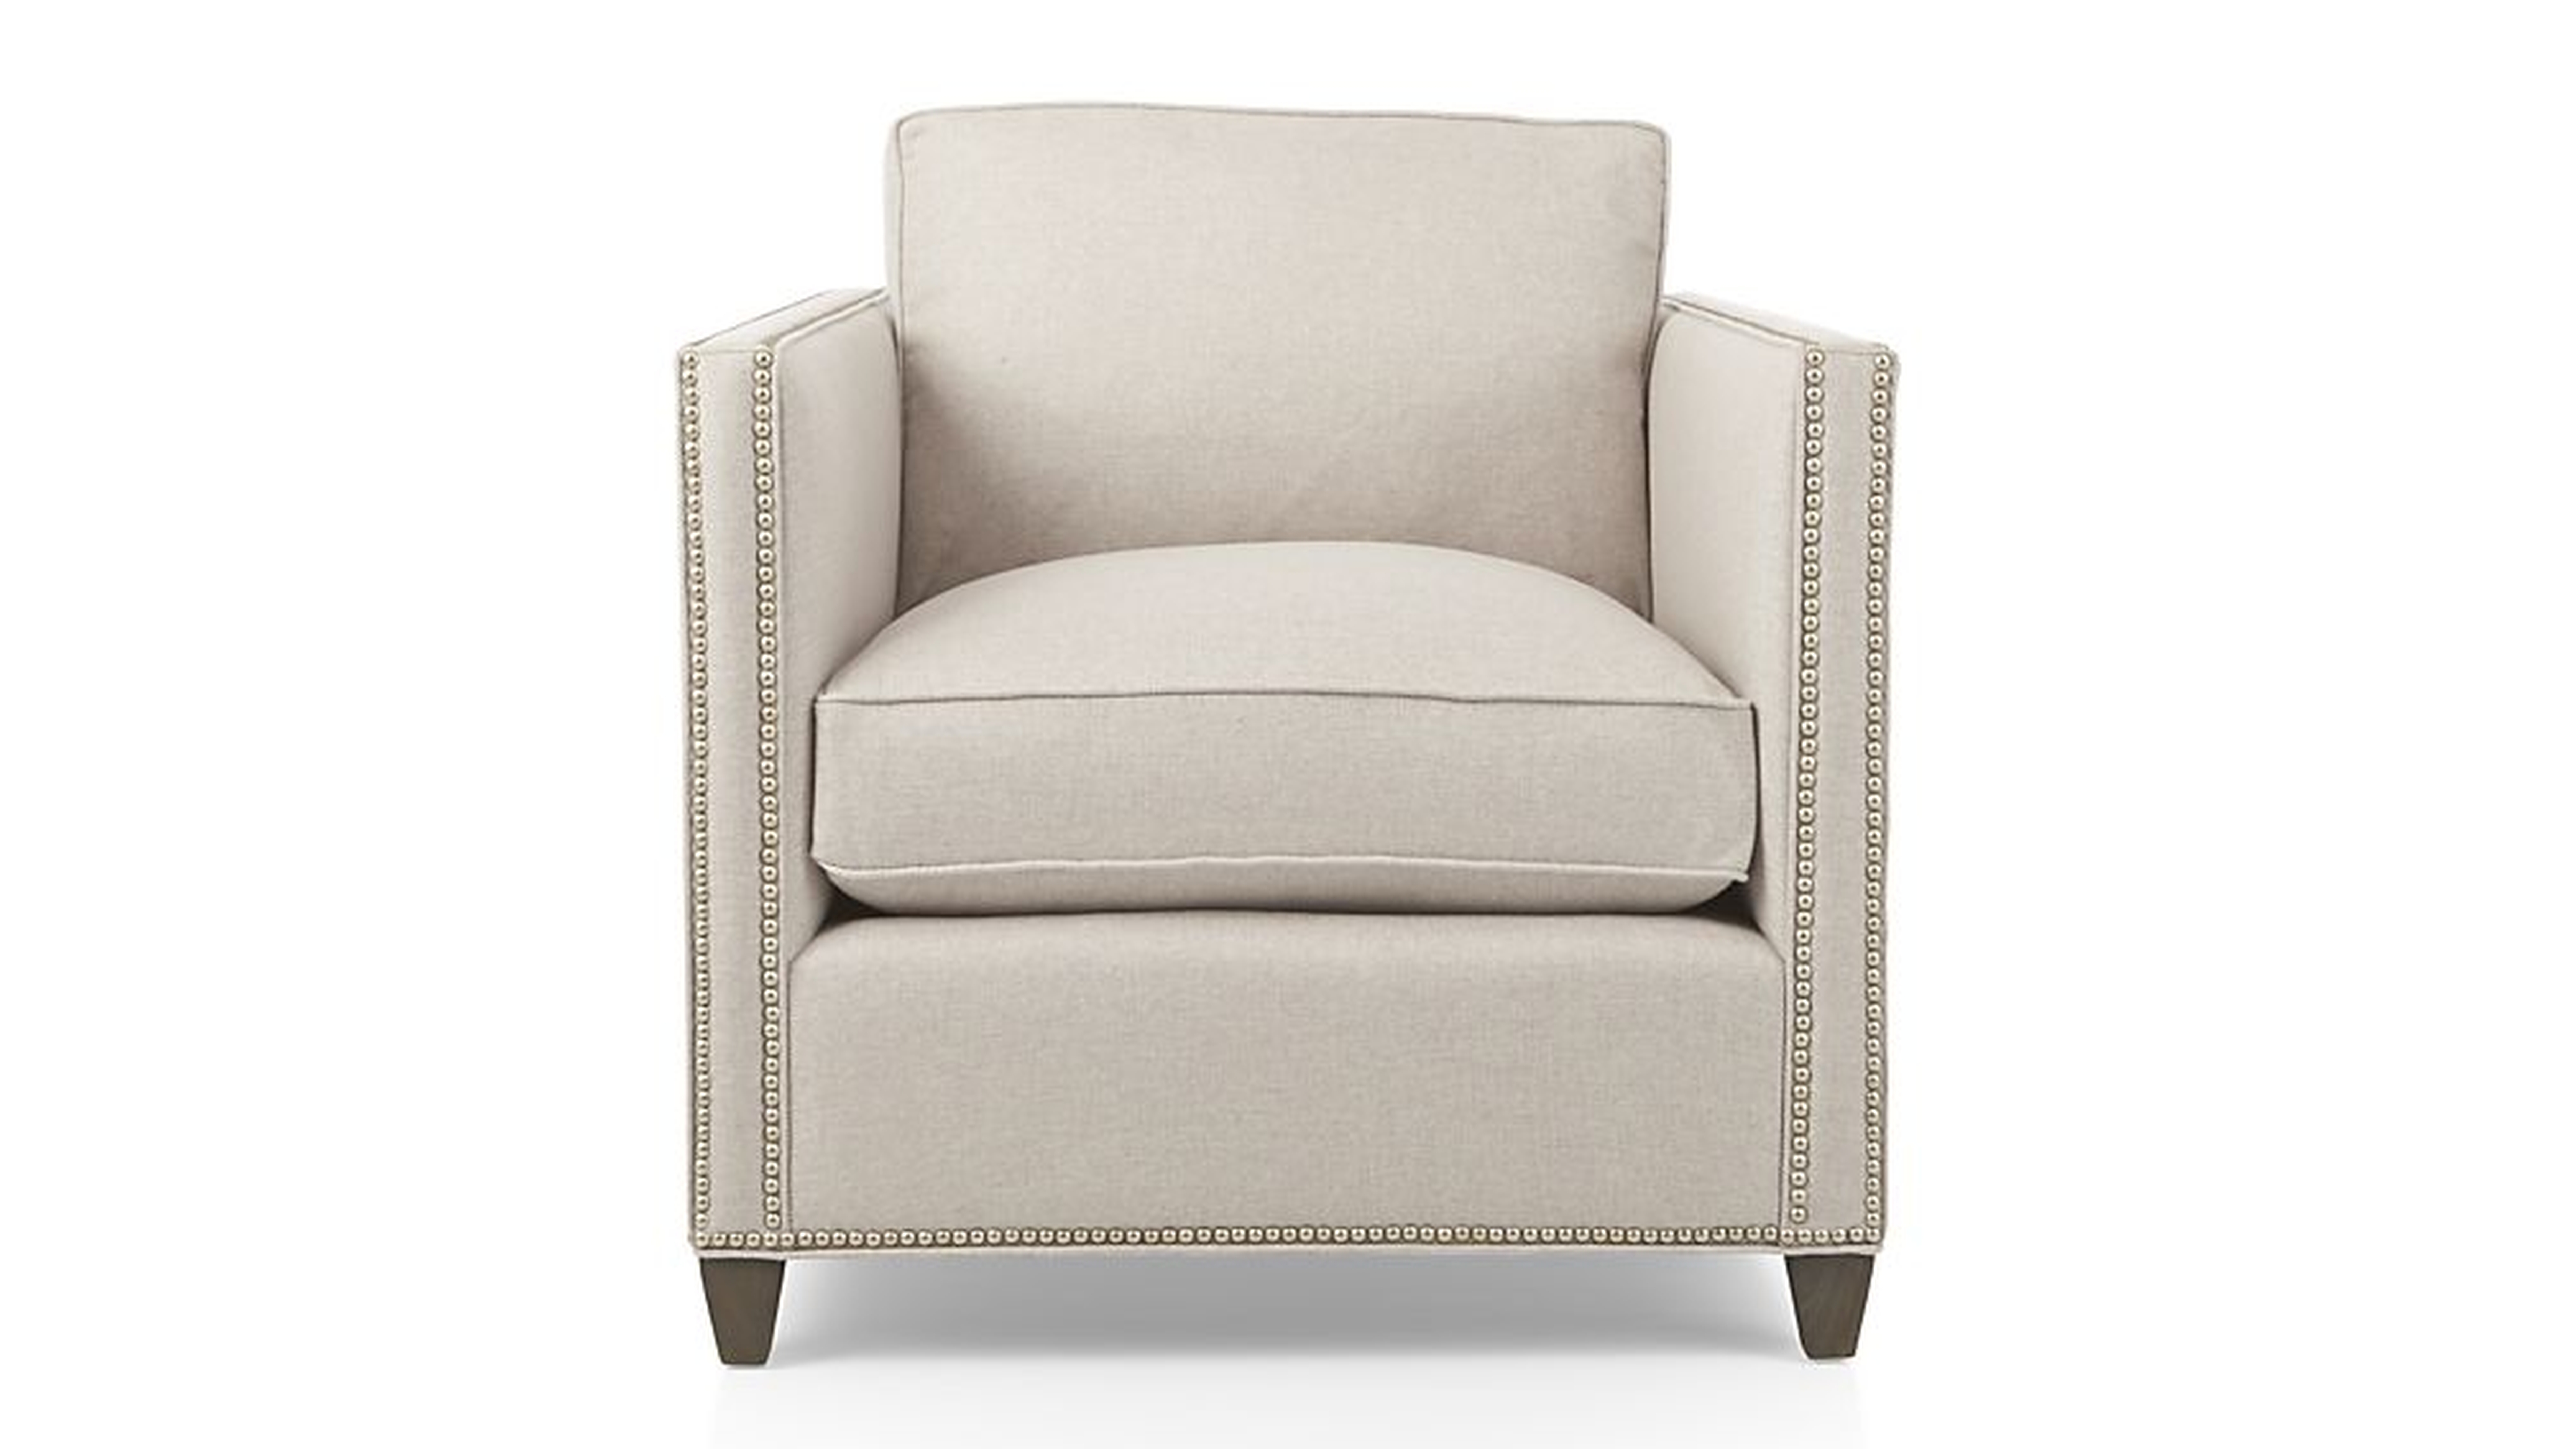 Dryden Chair with Nailheads - Flax - Crate and Barrel